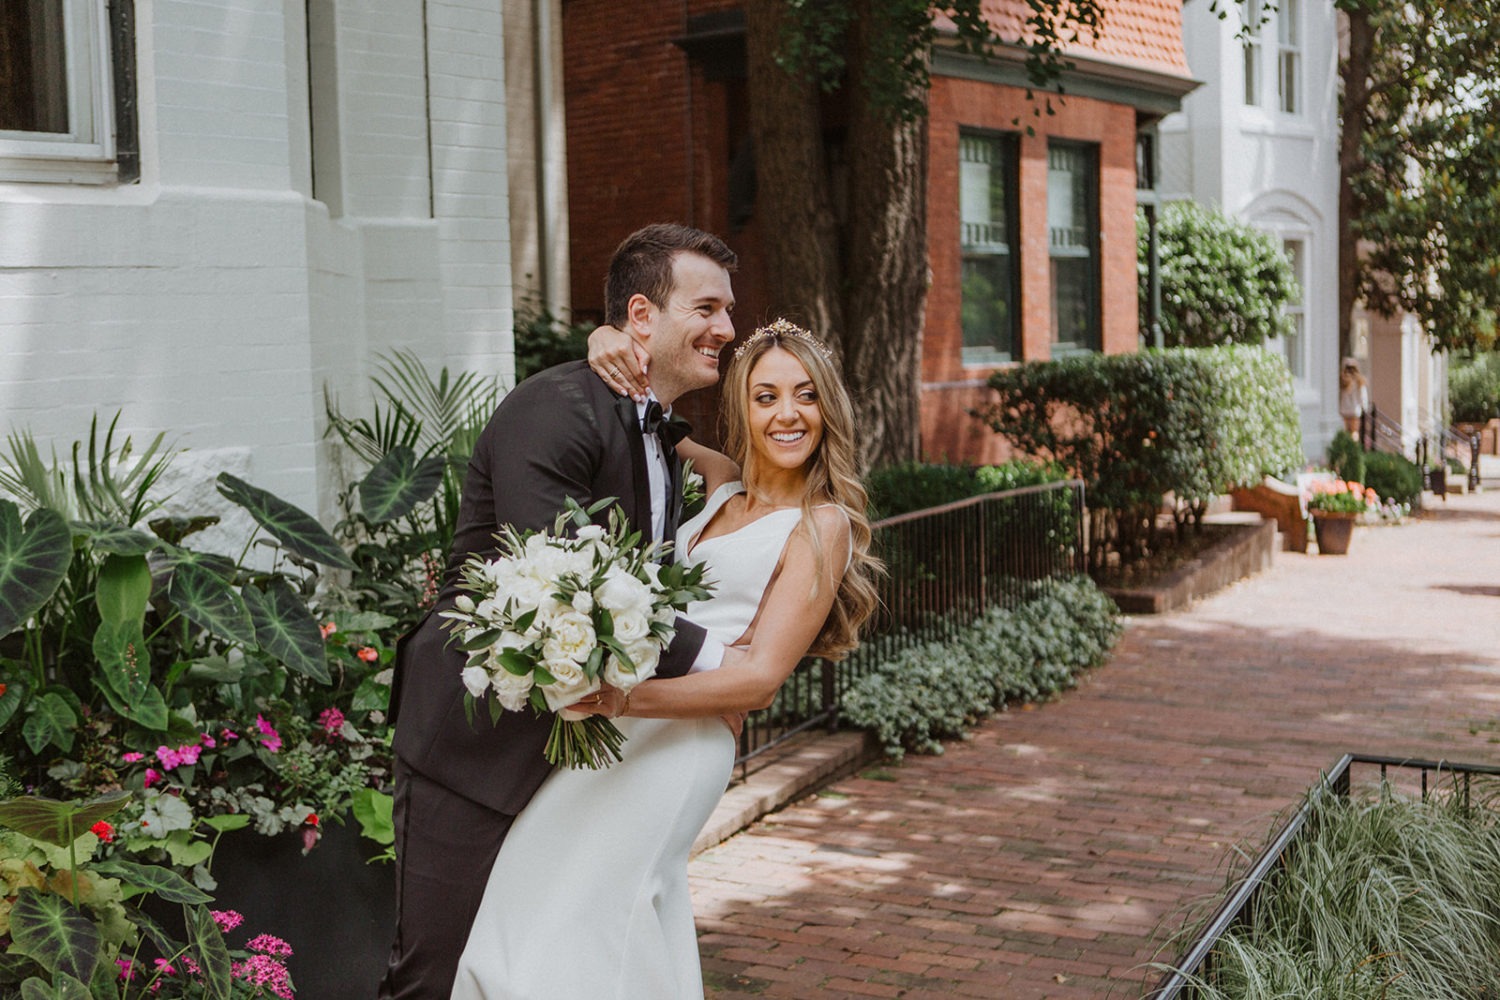 Couple embraces on Georgetown streets at Tudor Place wedding